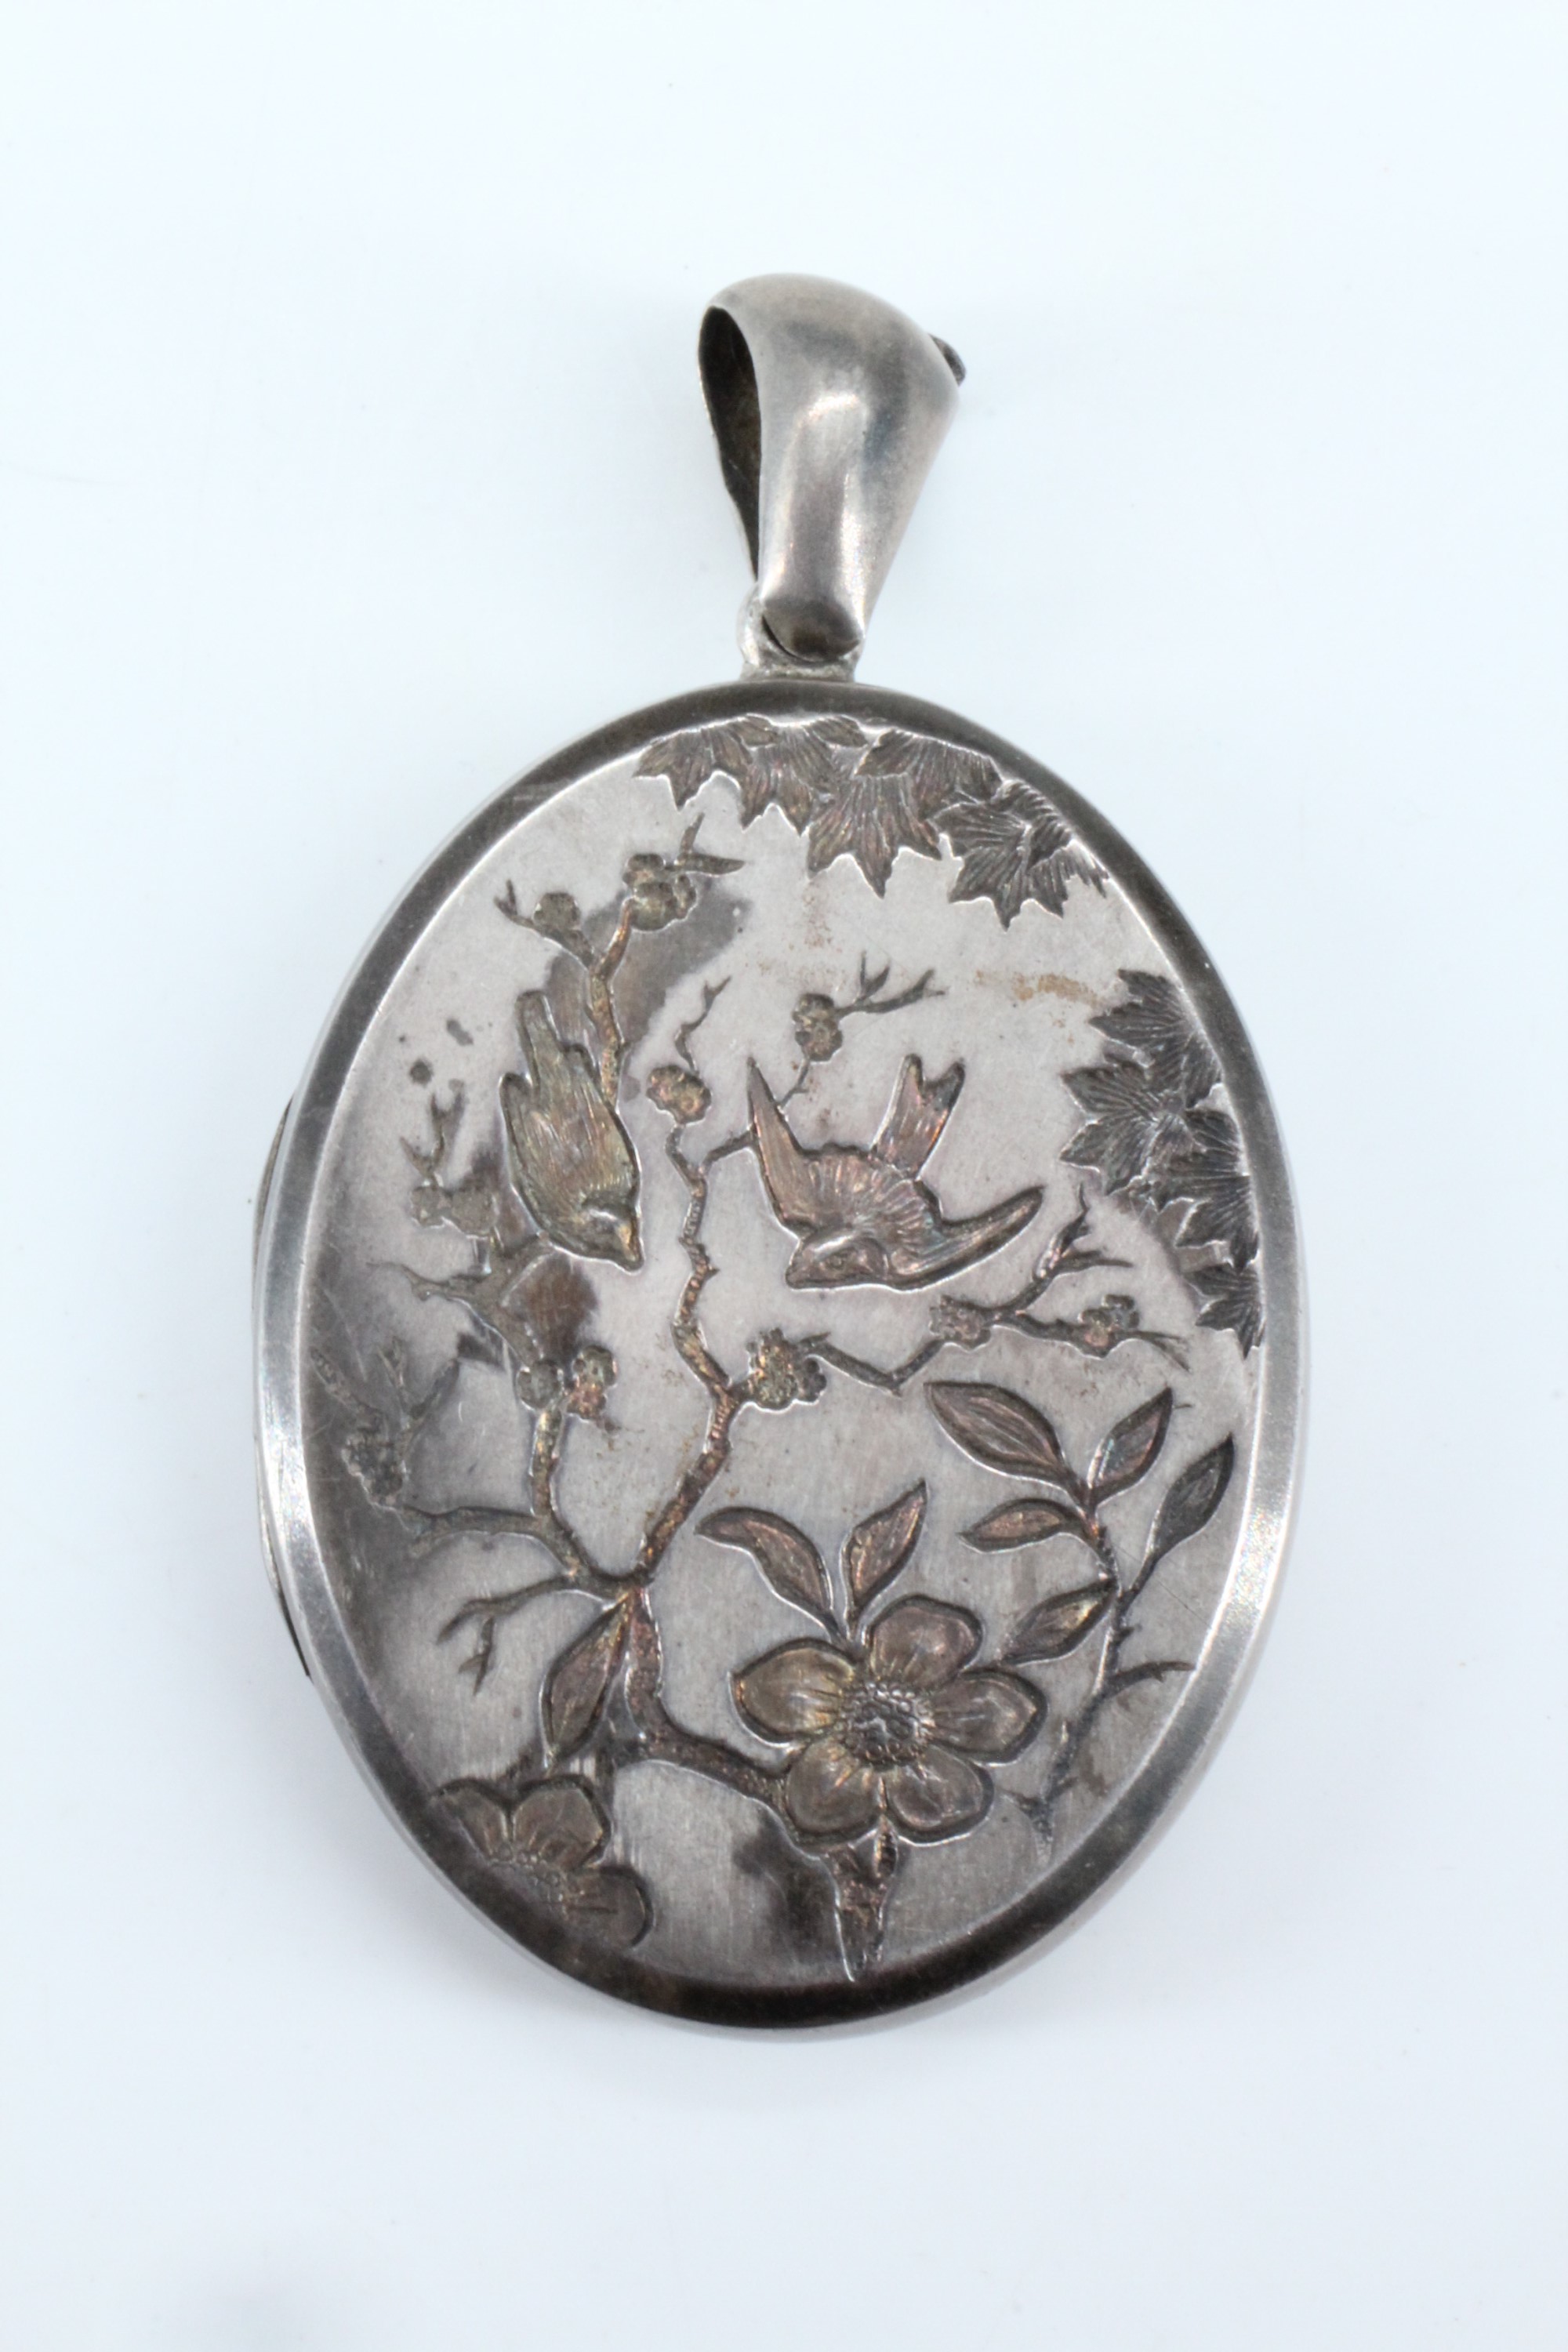 A Victorian Aesthetic Movement influenced white metal double pendant locket, its face shallow relief